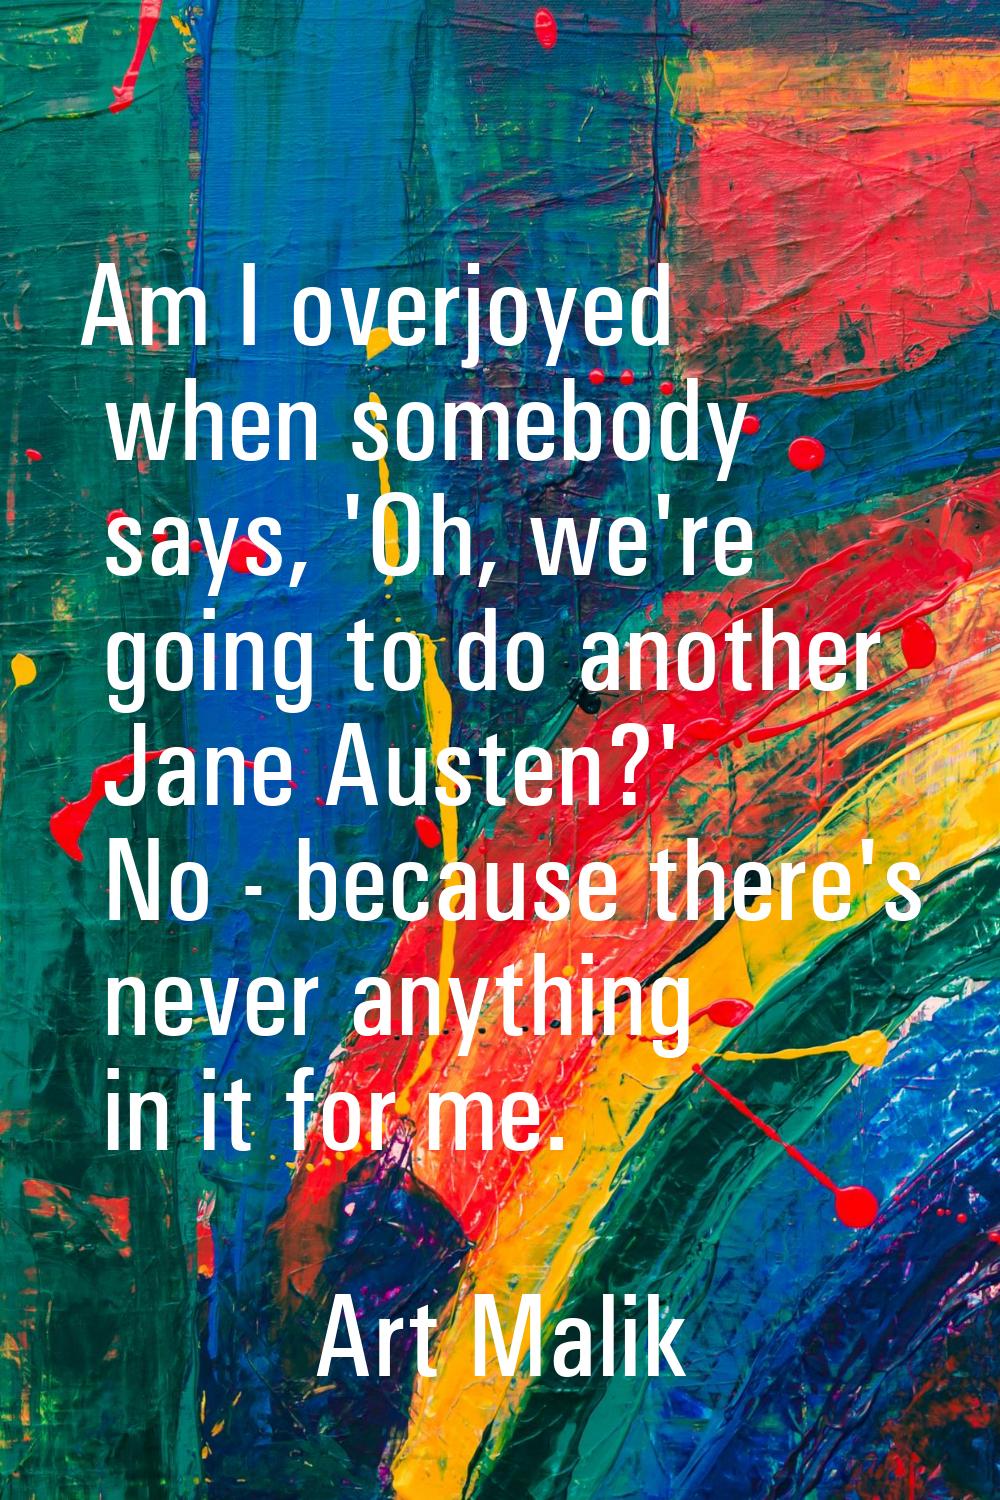 Am I overjoyed when somebody says, 'Oh, we're going to do another Jane Austen?' No - because there'